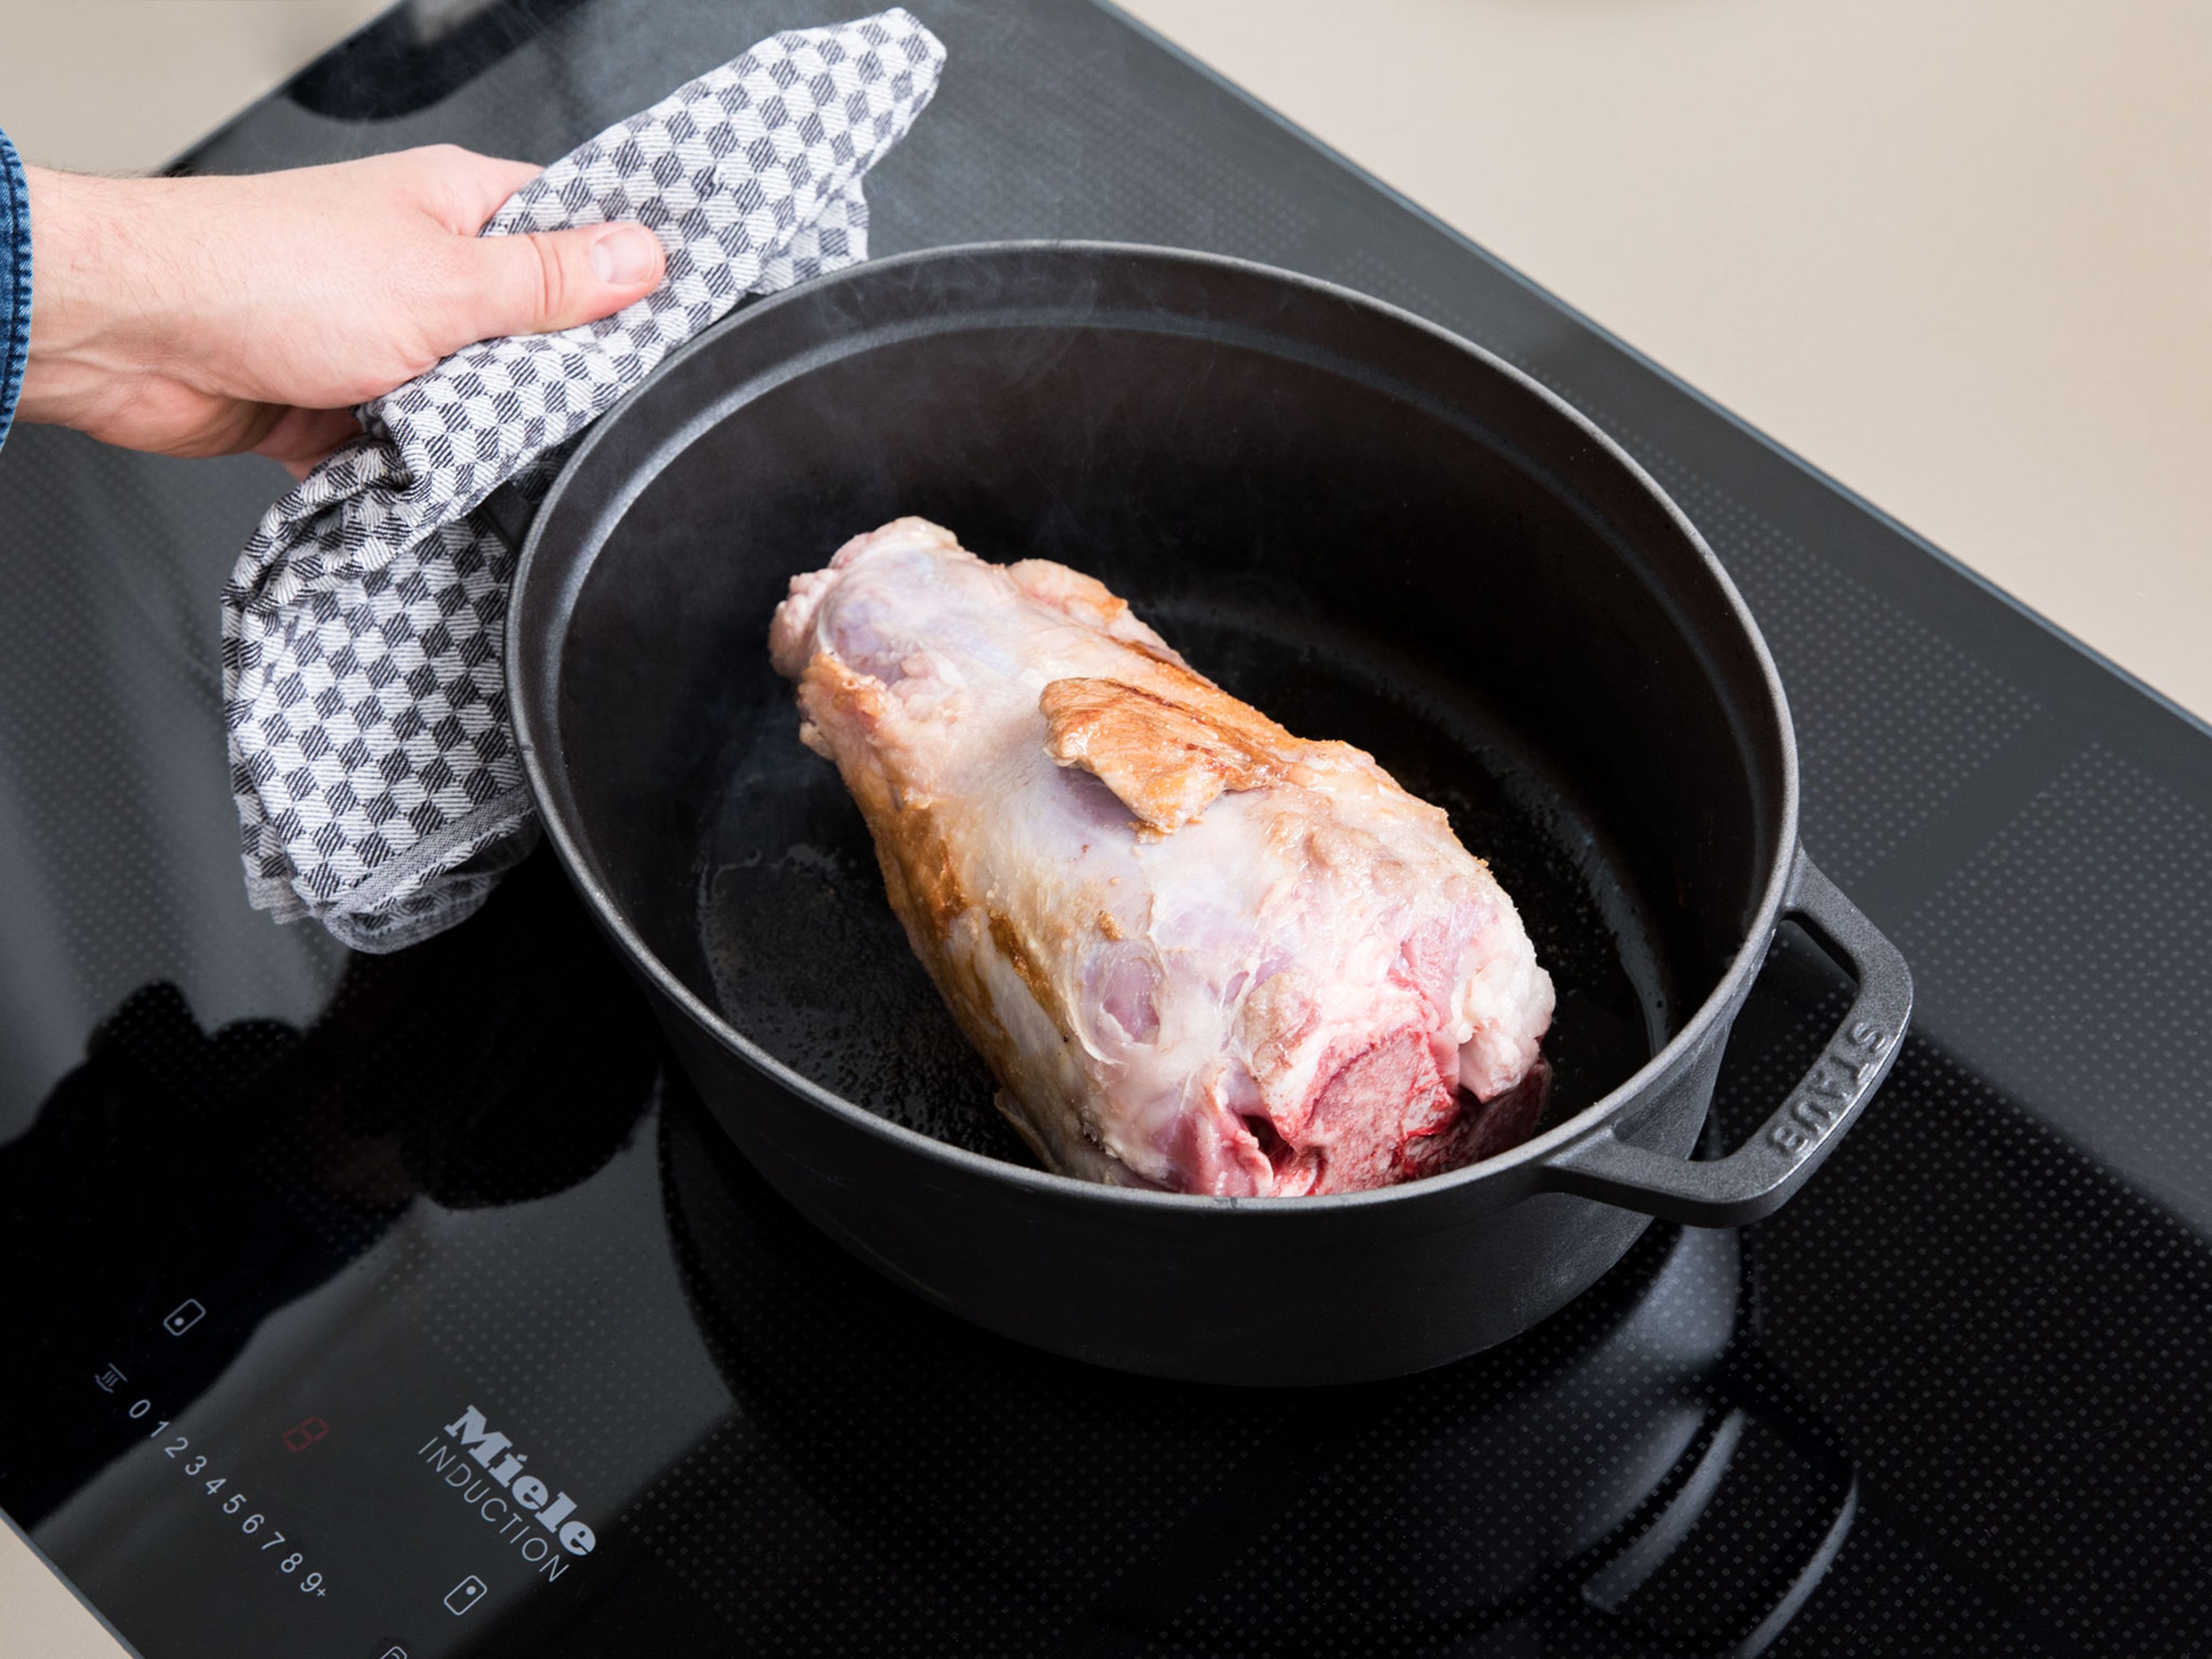 Heat oil in a heavy-bottomed ovenproof pot set over medium-high heat. Place the veal knuckle in the pot and fry on all sides until browned and golden. Next, add the chopped onions, garlic cloves, carrots, and celery and fry approx. 5 min.